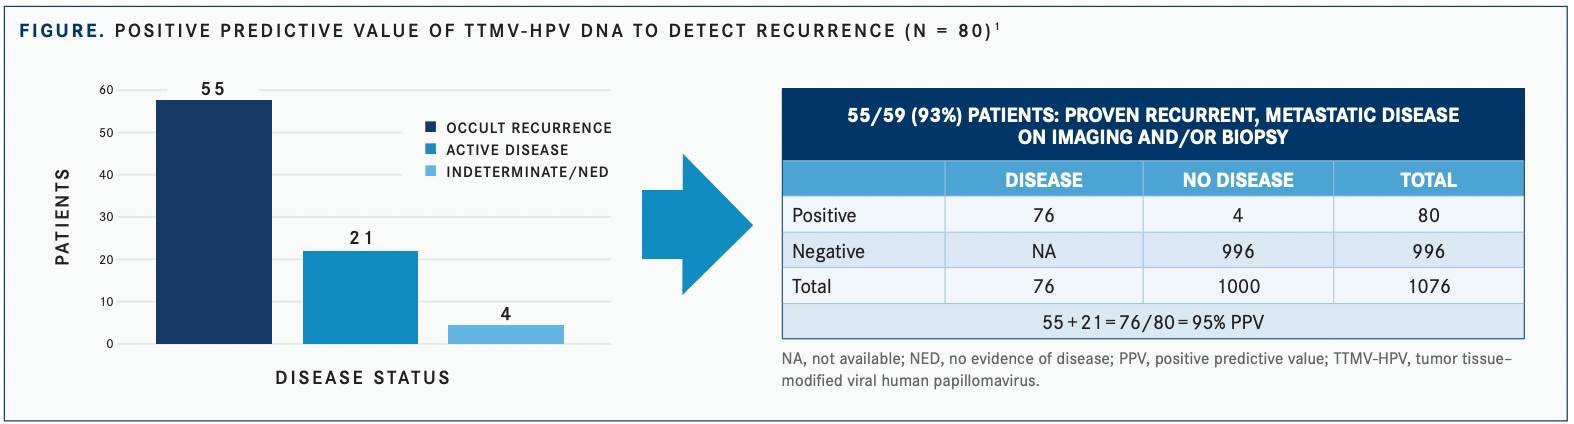 POSITIVE PREDICTIVE VALUE OF TTMV-HPV DNA TO DETECT RECURRENCE (N = 80) 1 